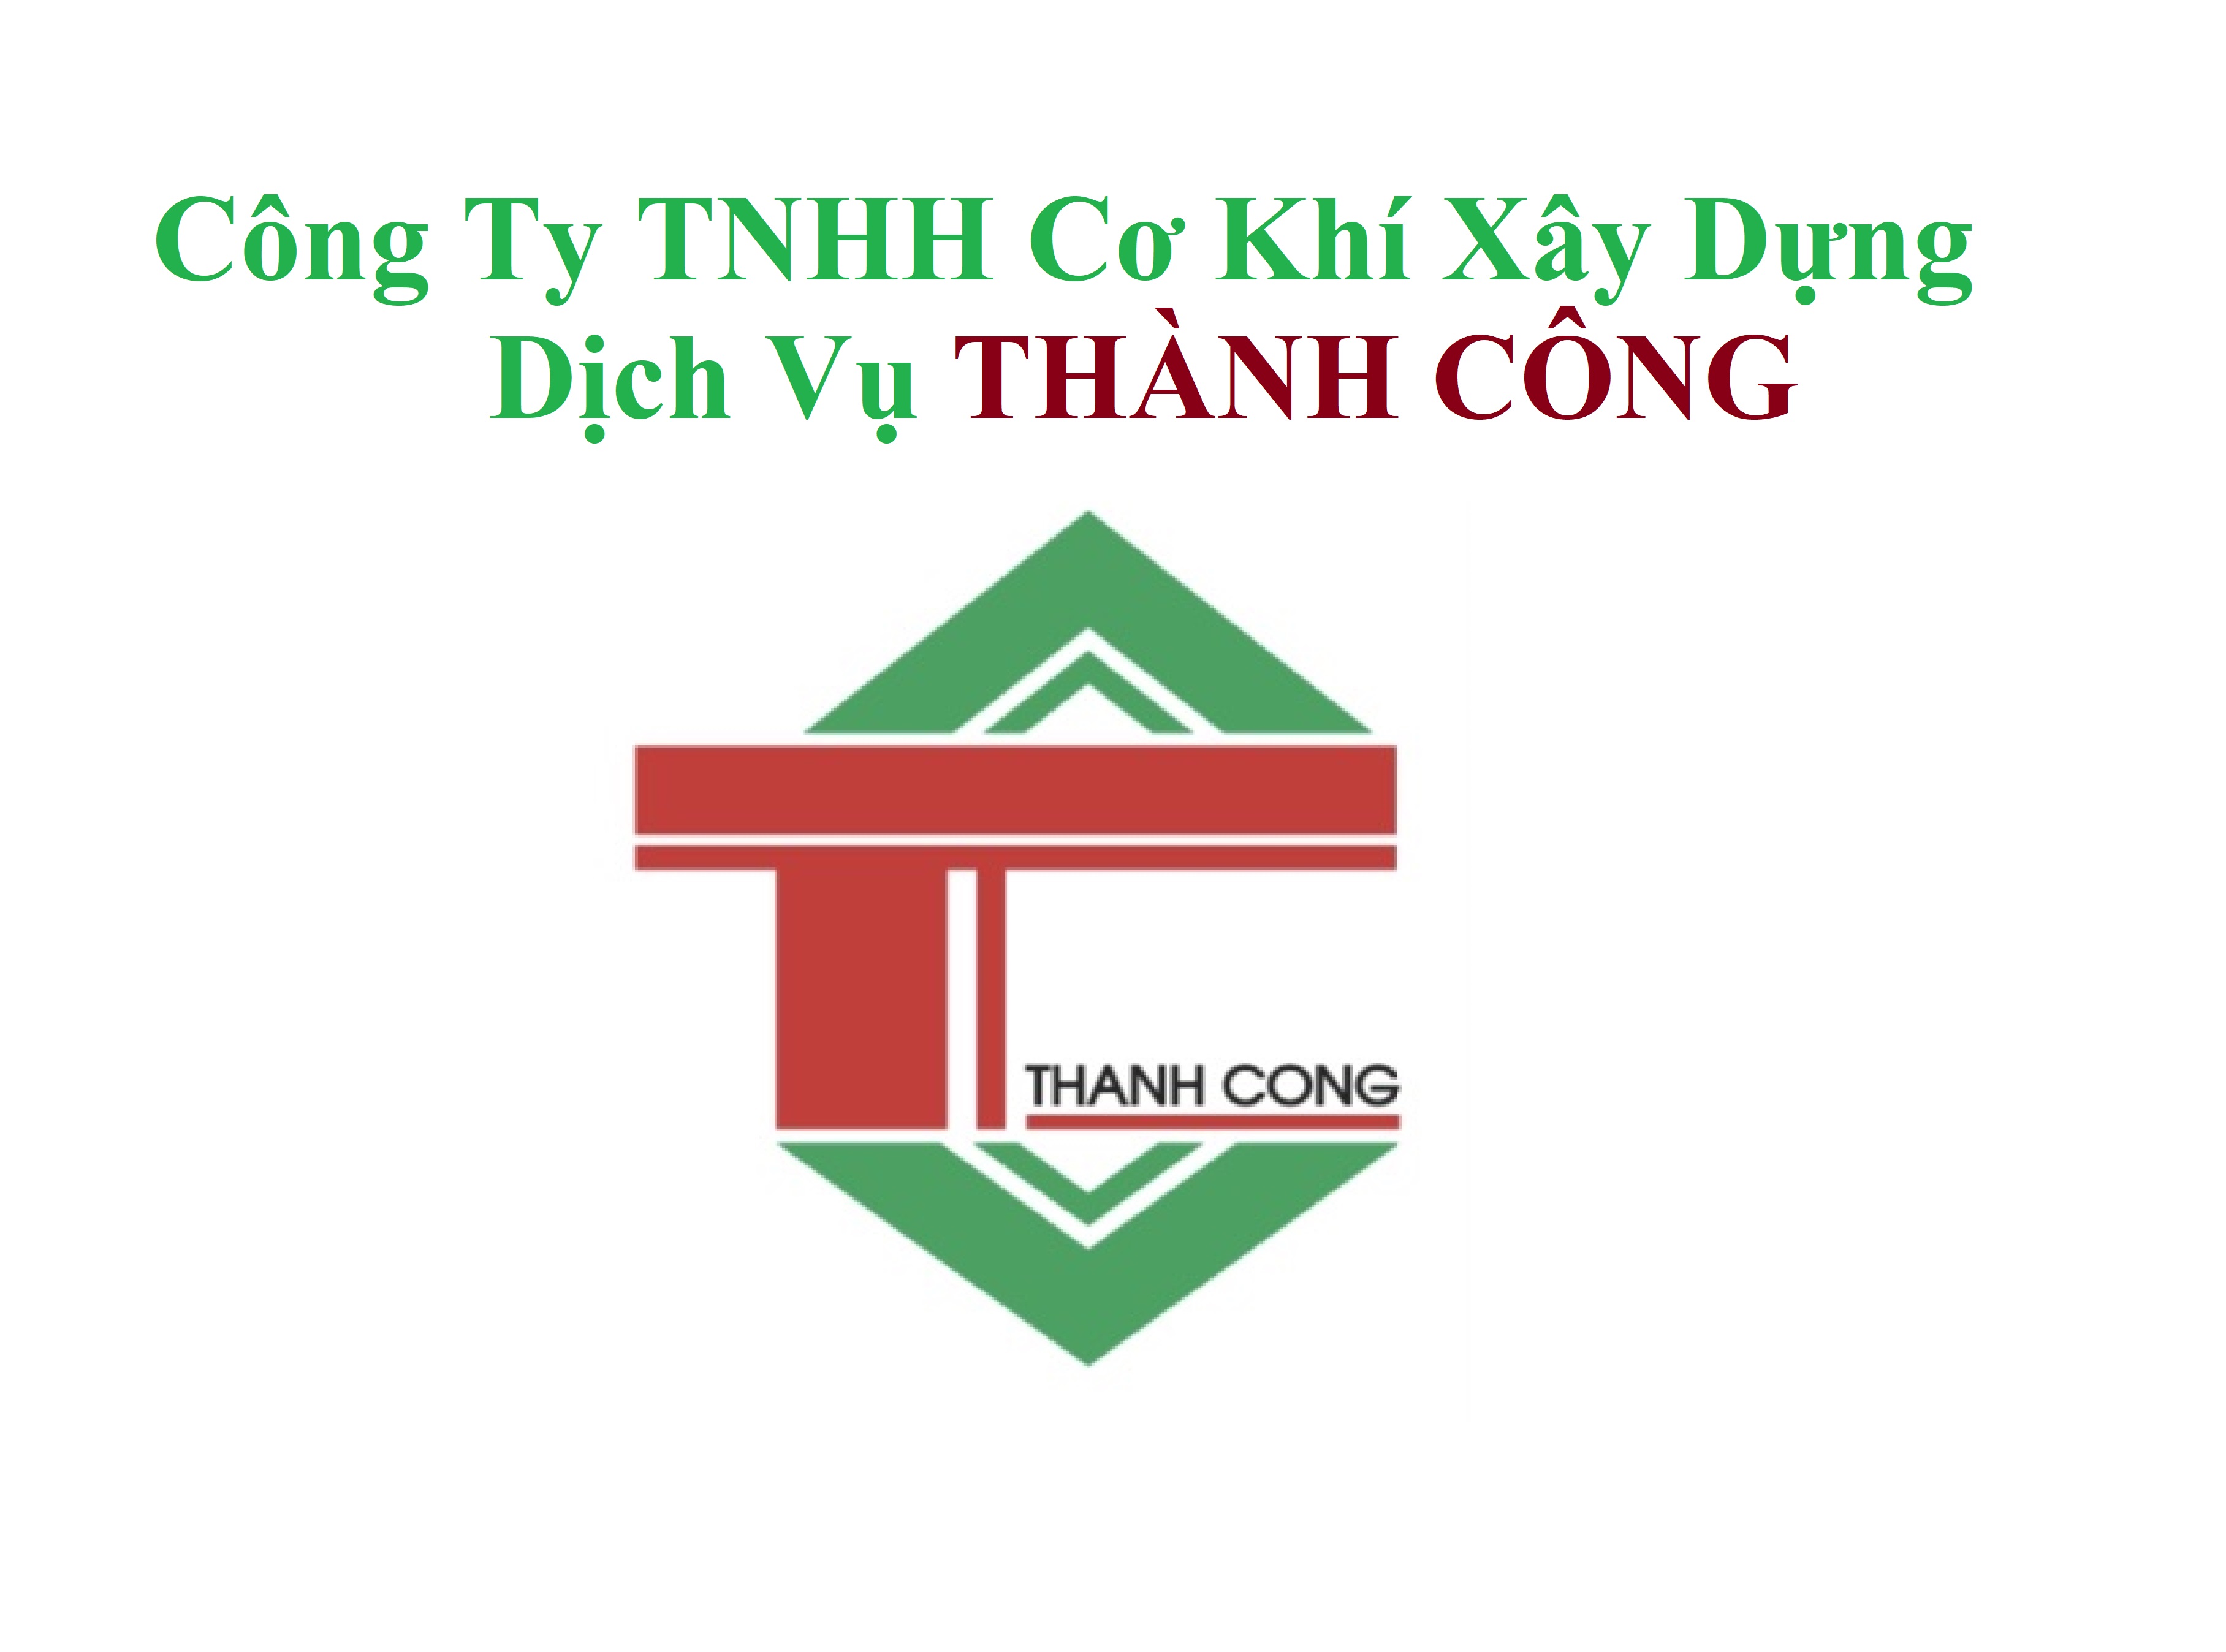 Thanh Cong